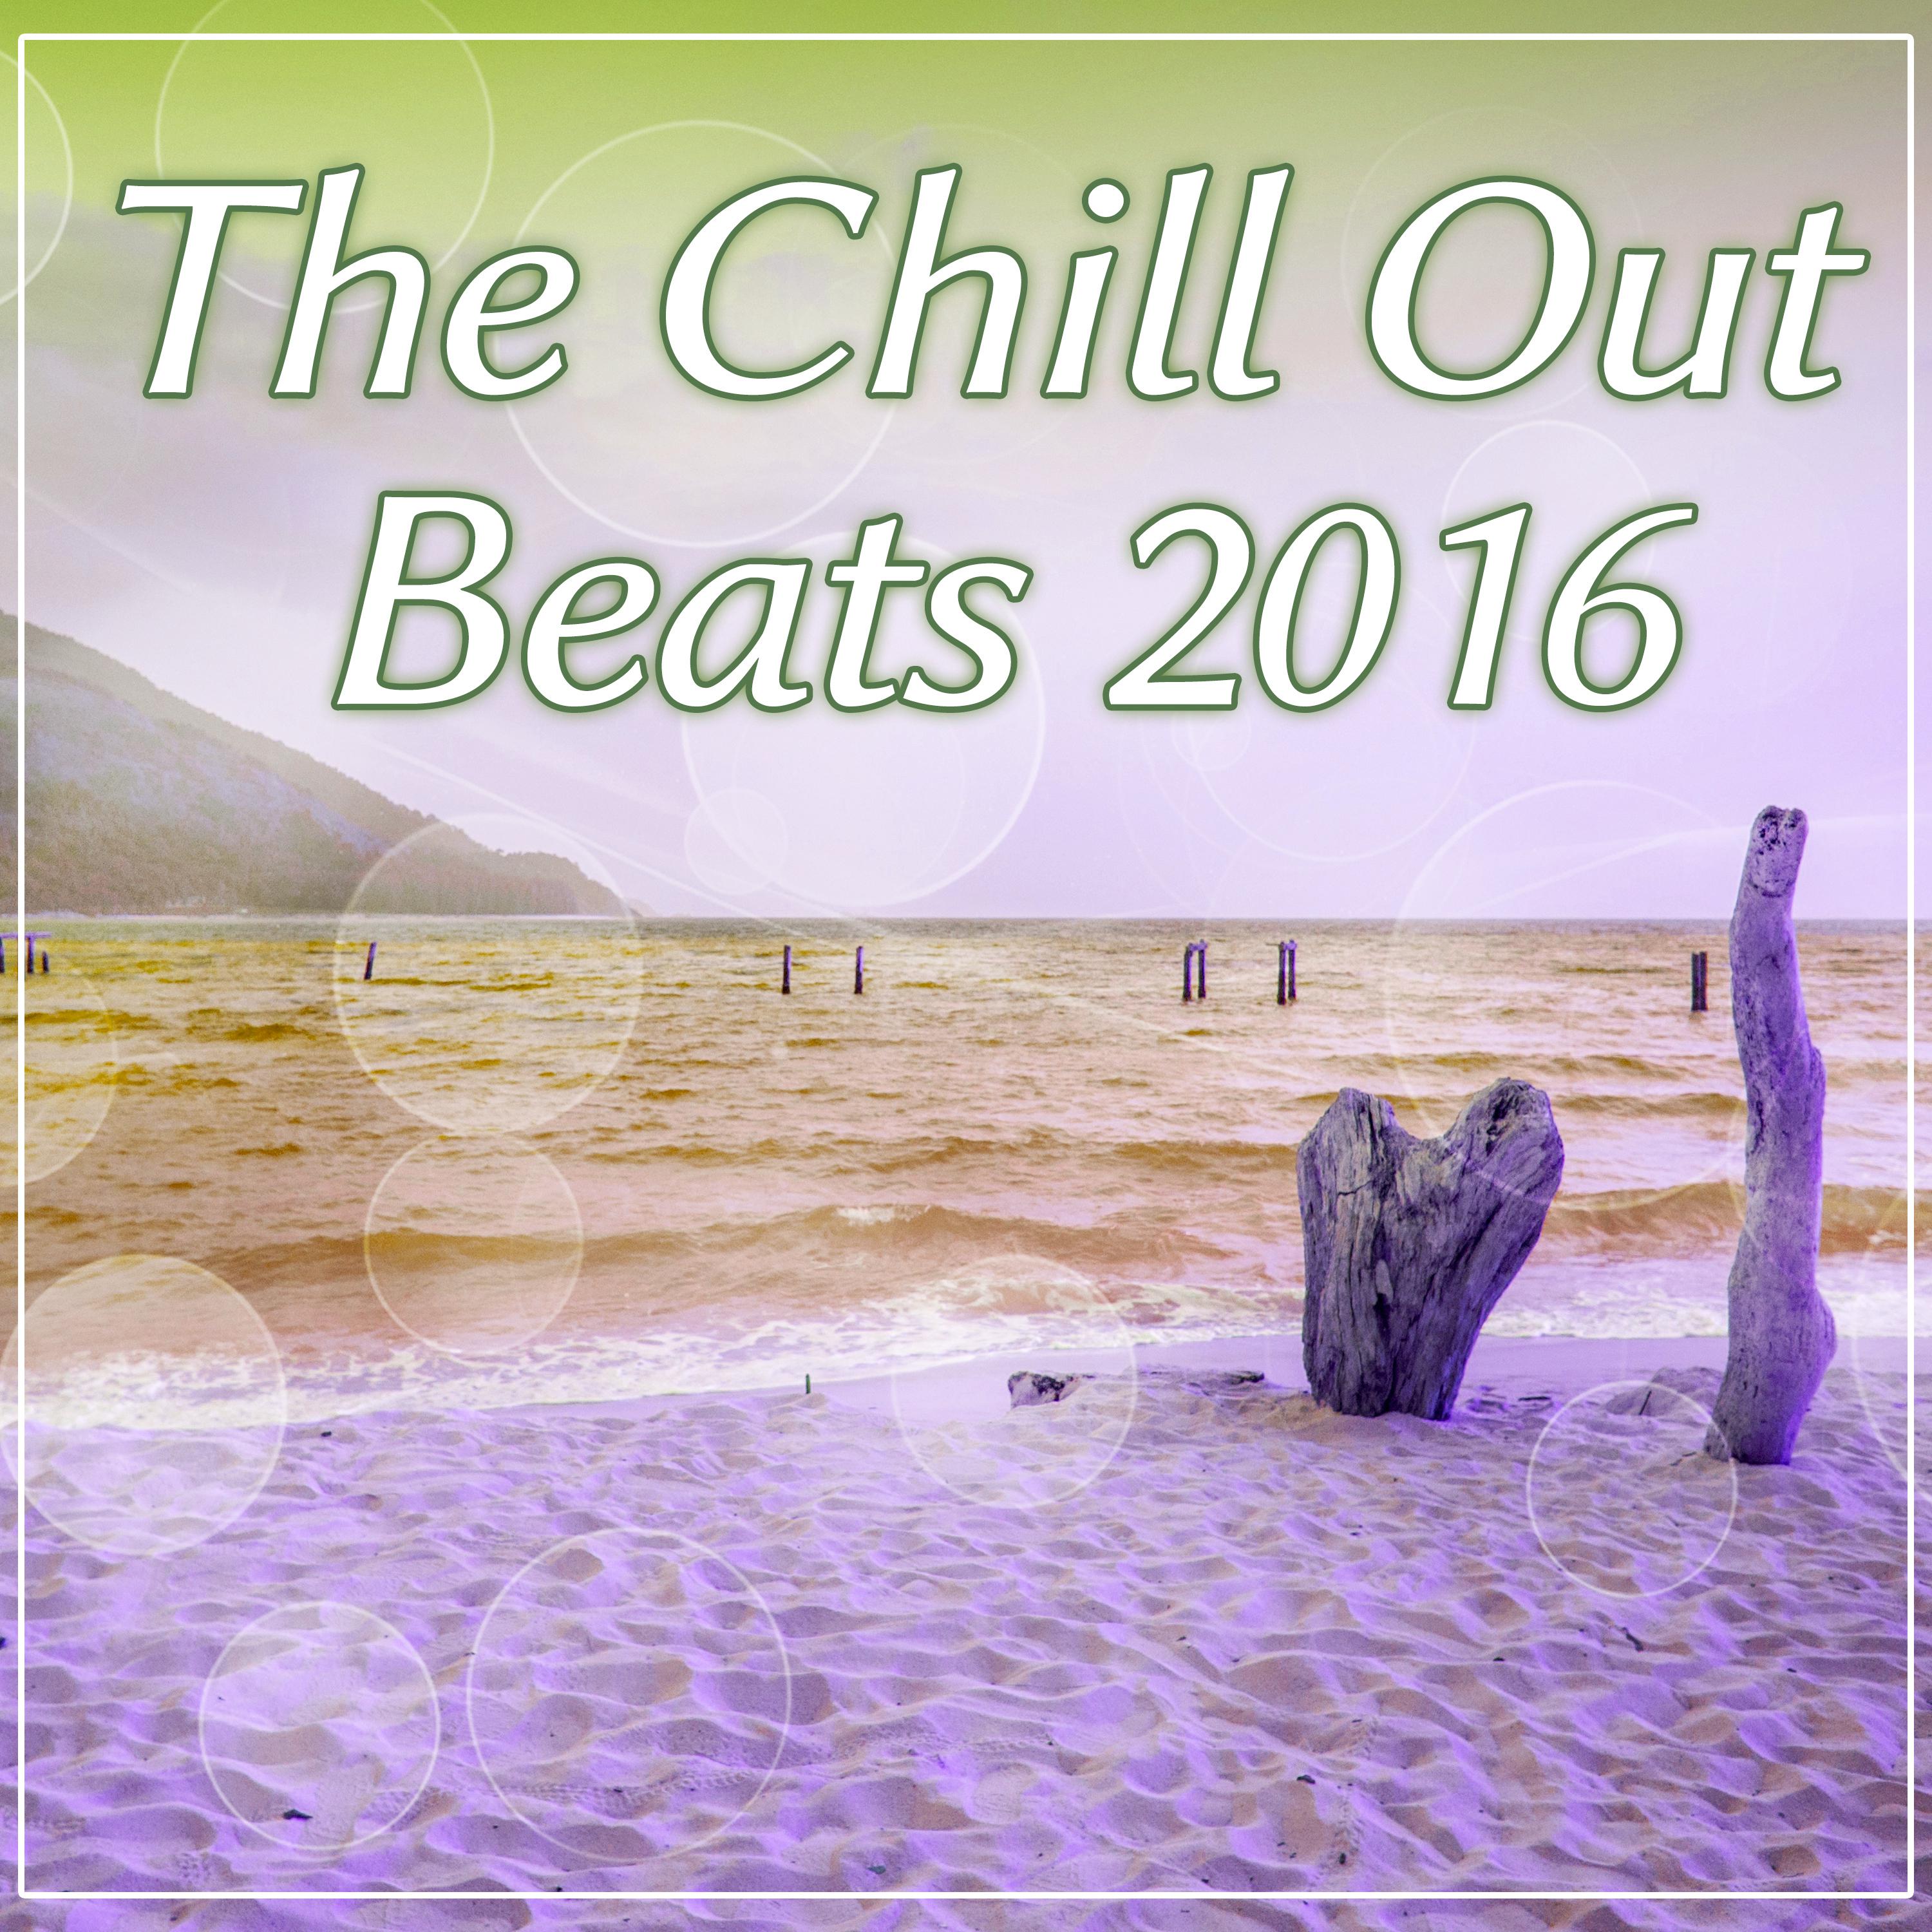 The Chill Out Beats 2016 – The Greatest Chillout Beats of the Year, Summer Music, Beach Party,  Greatest Beats of Summer Chill Out